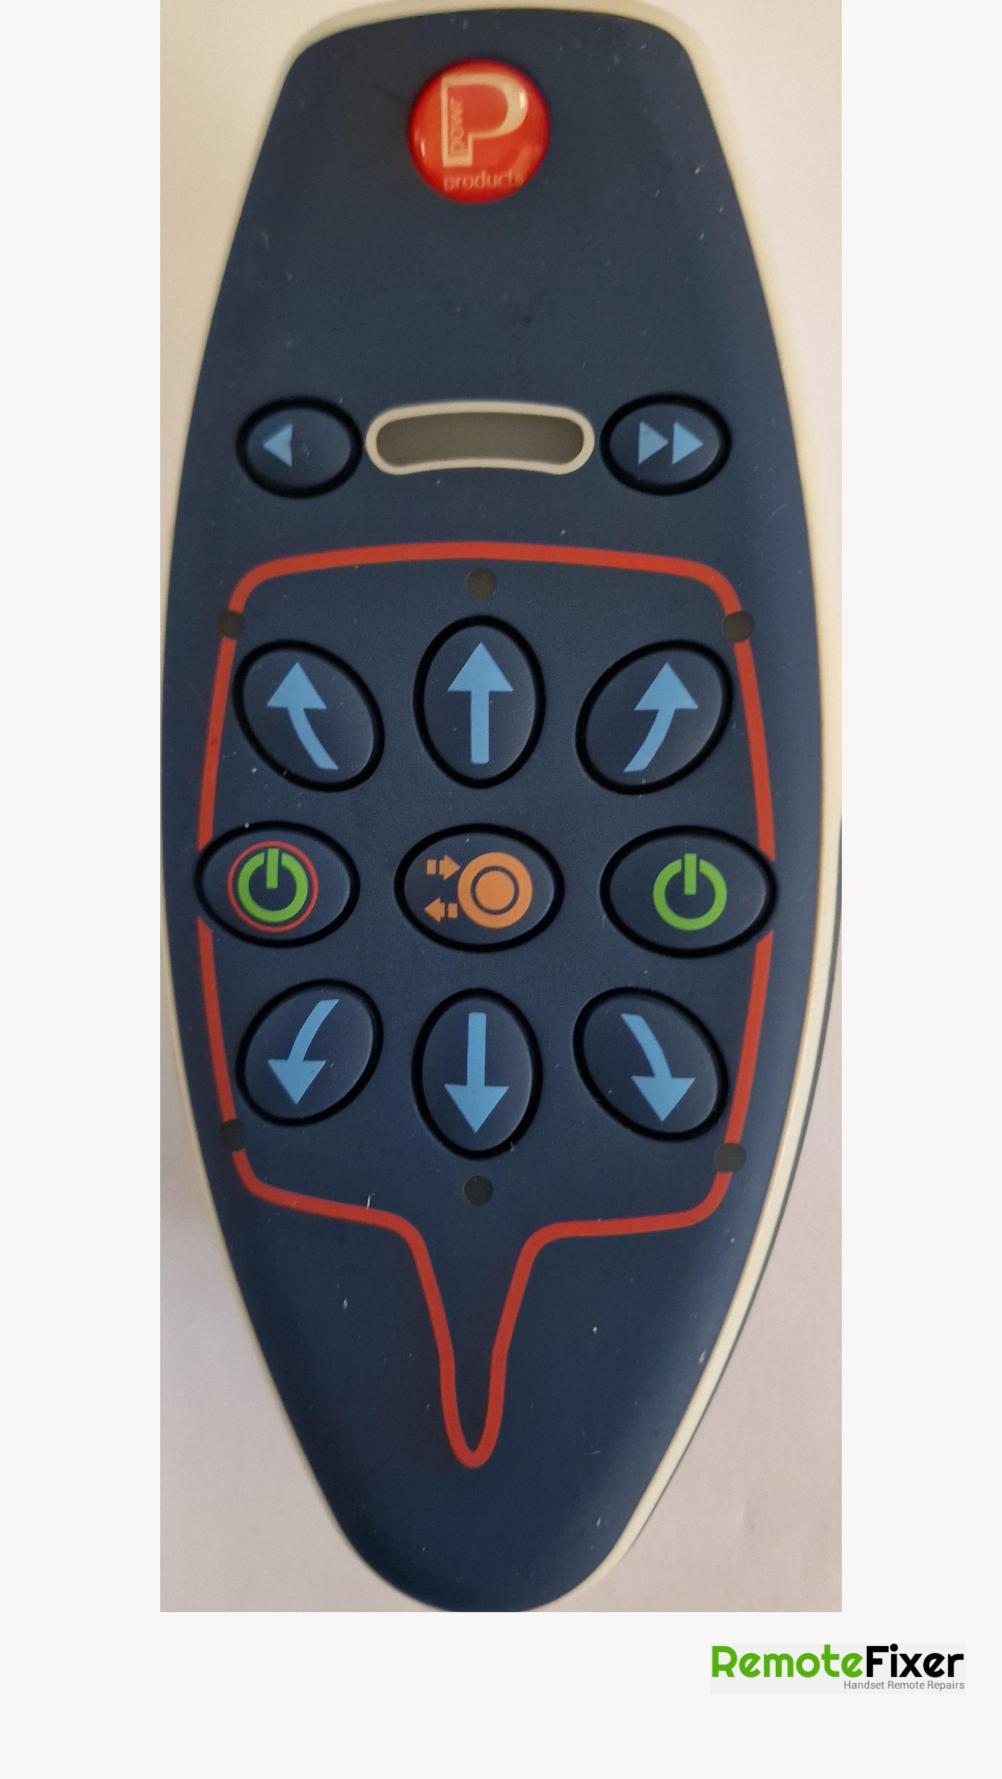 Powr products  Remote Control - Front Image